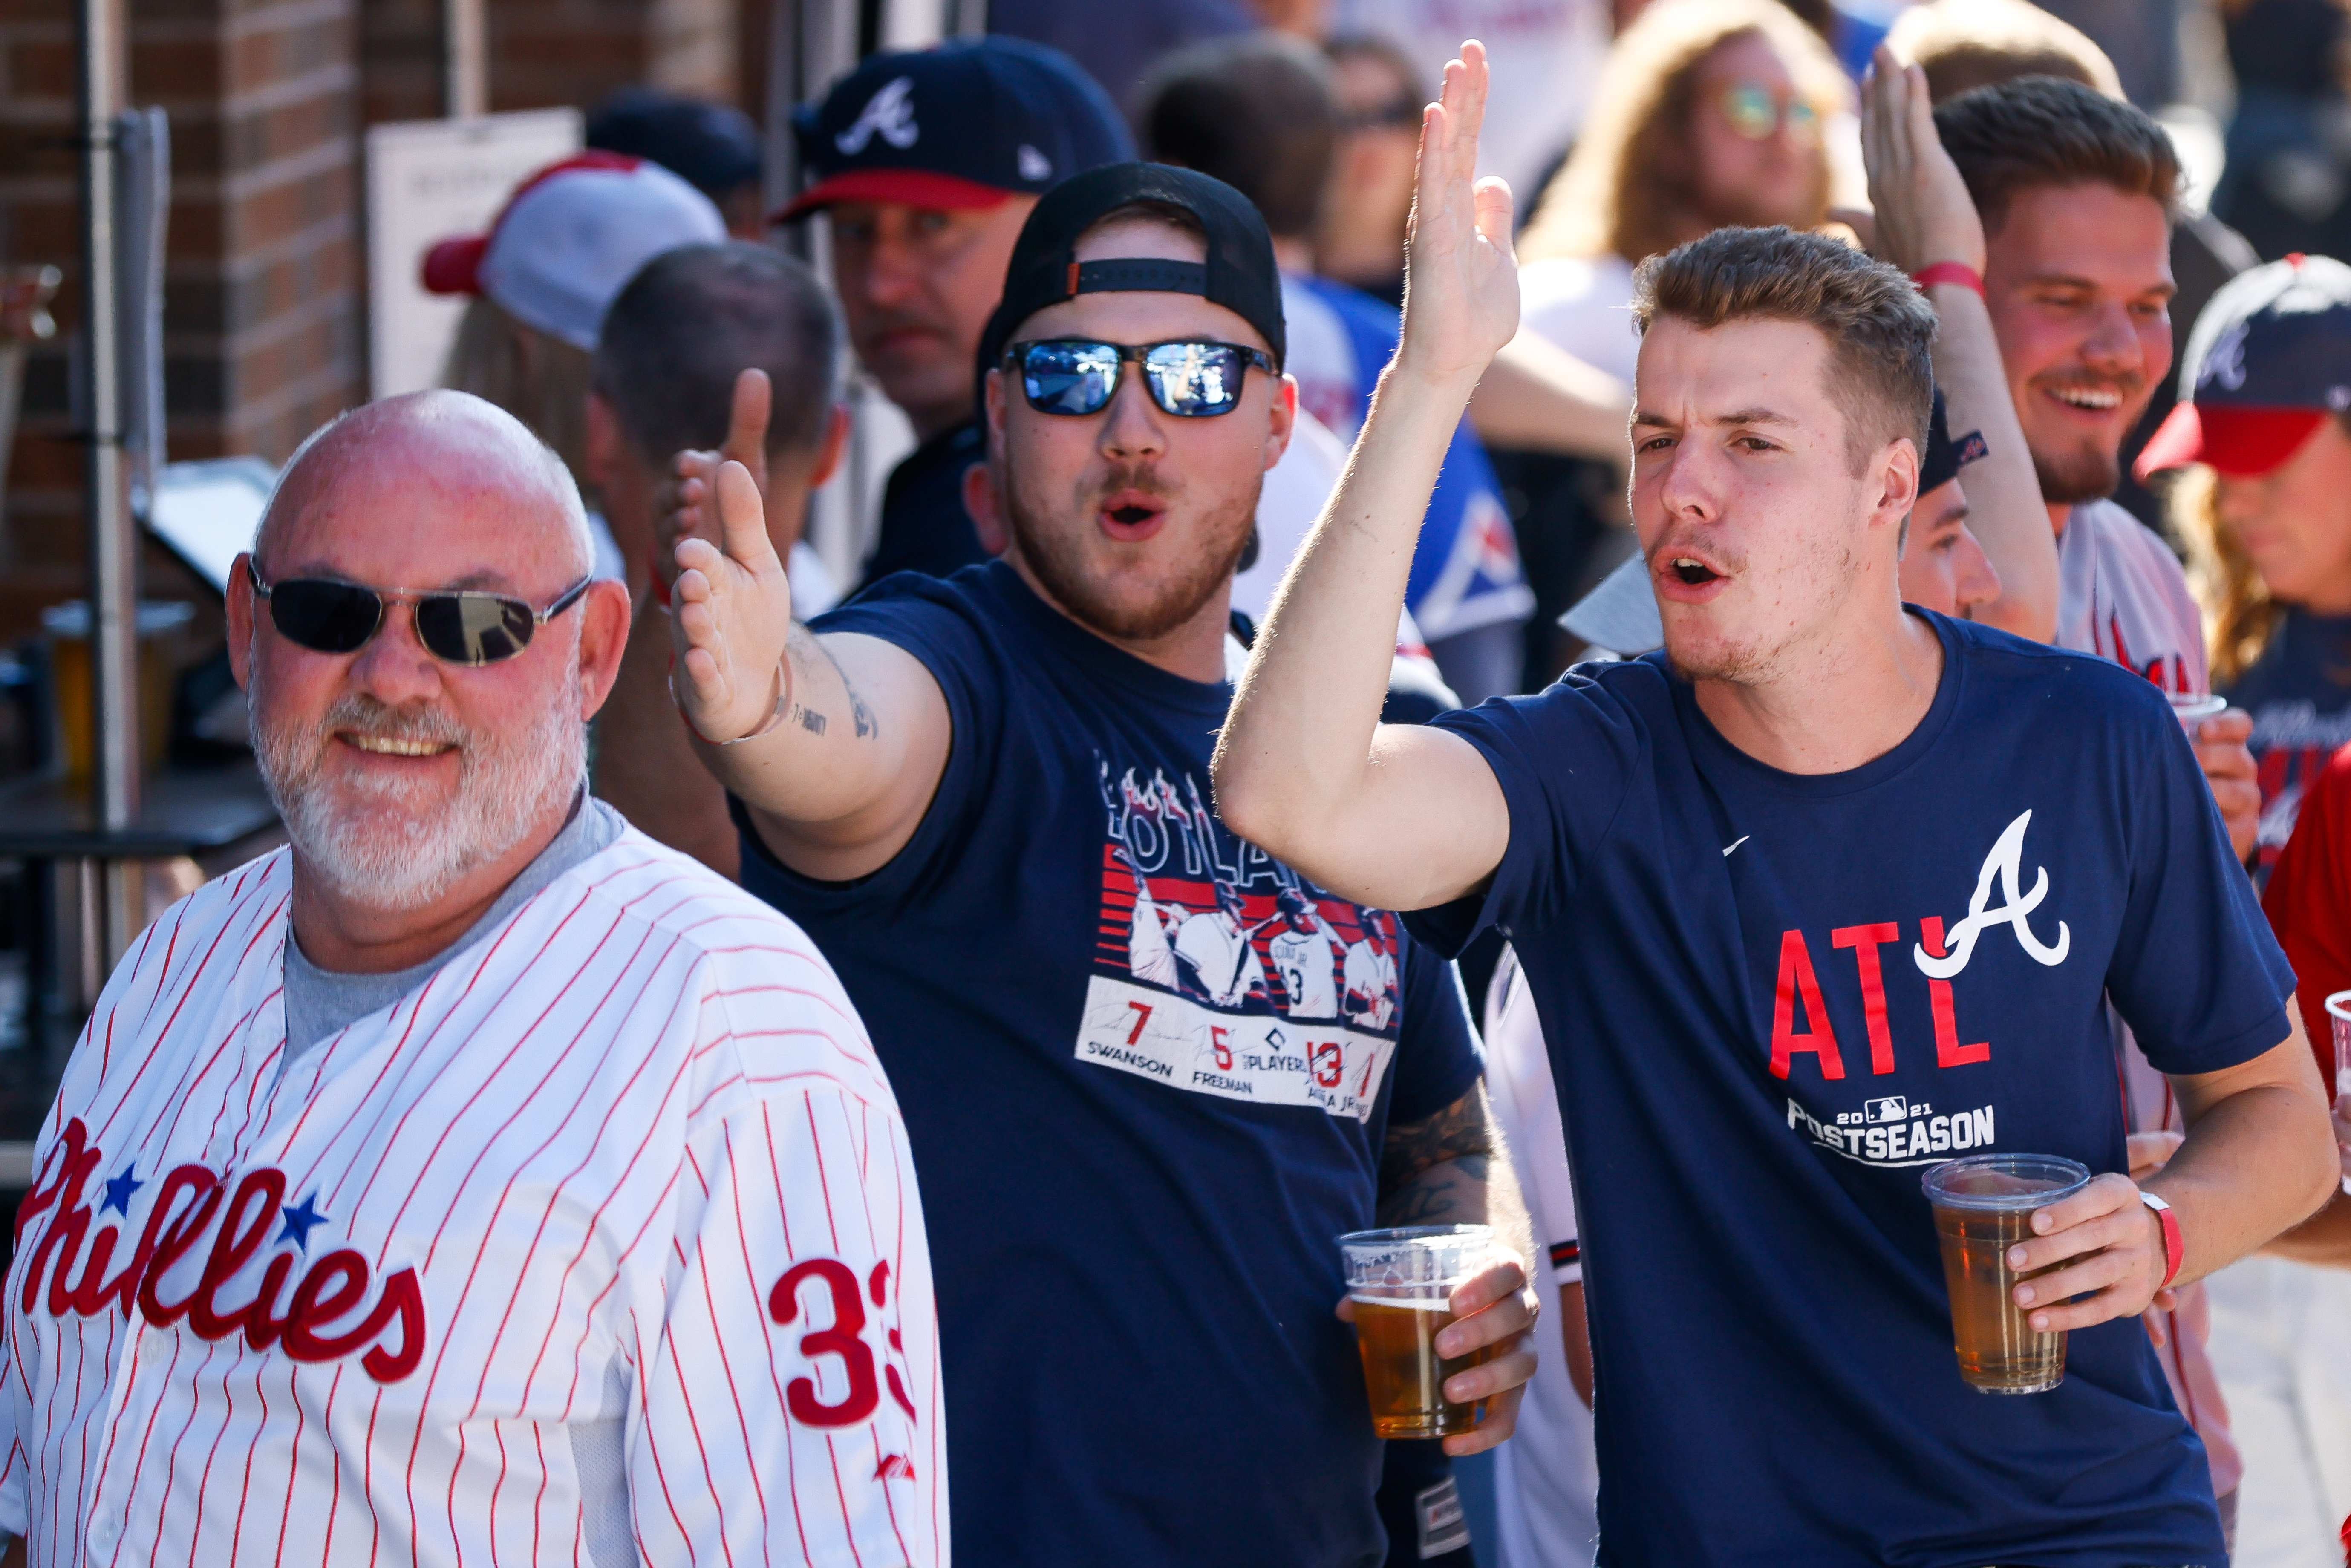 Fans roar as Phillies parade through Philly, Sports